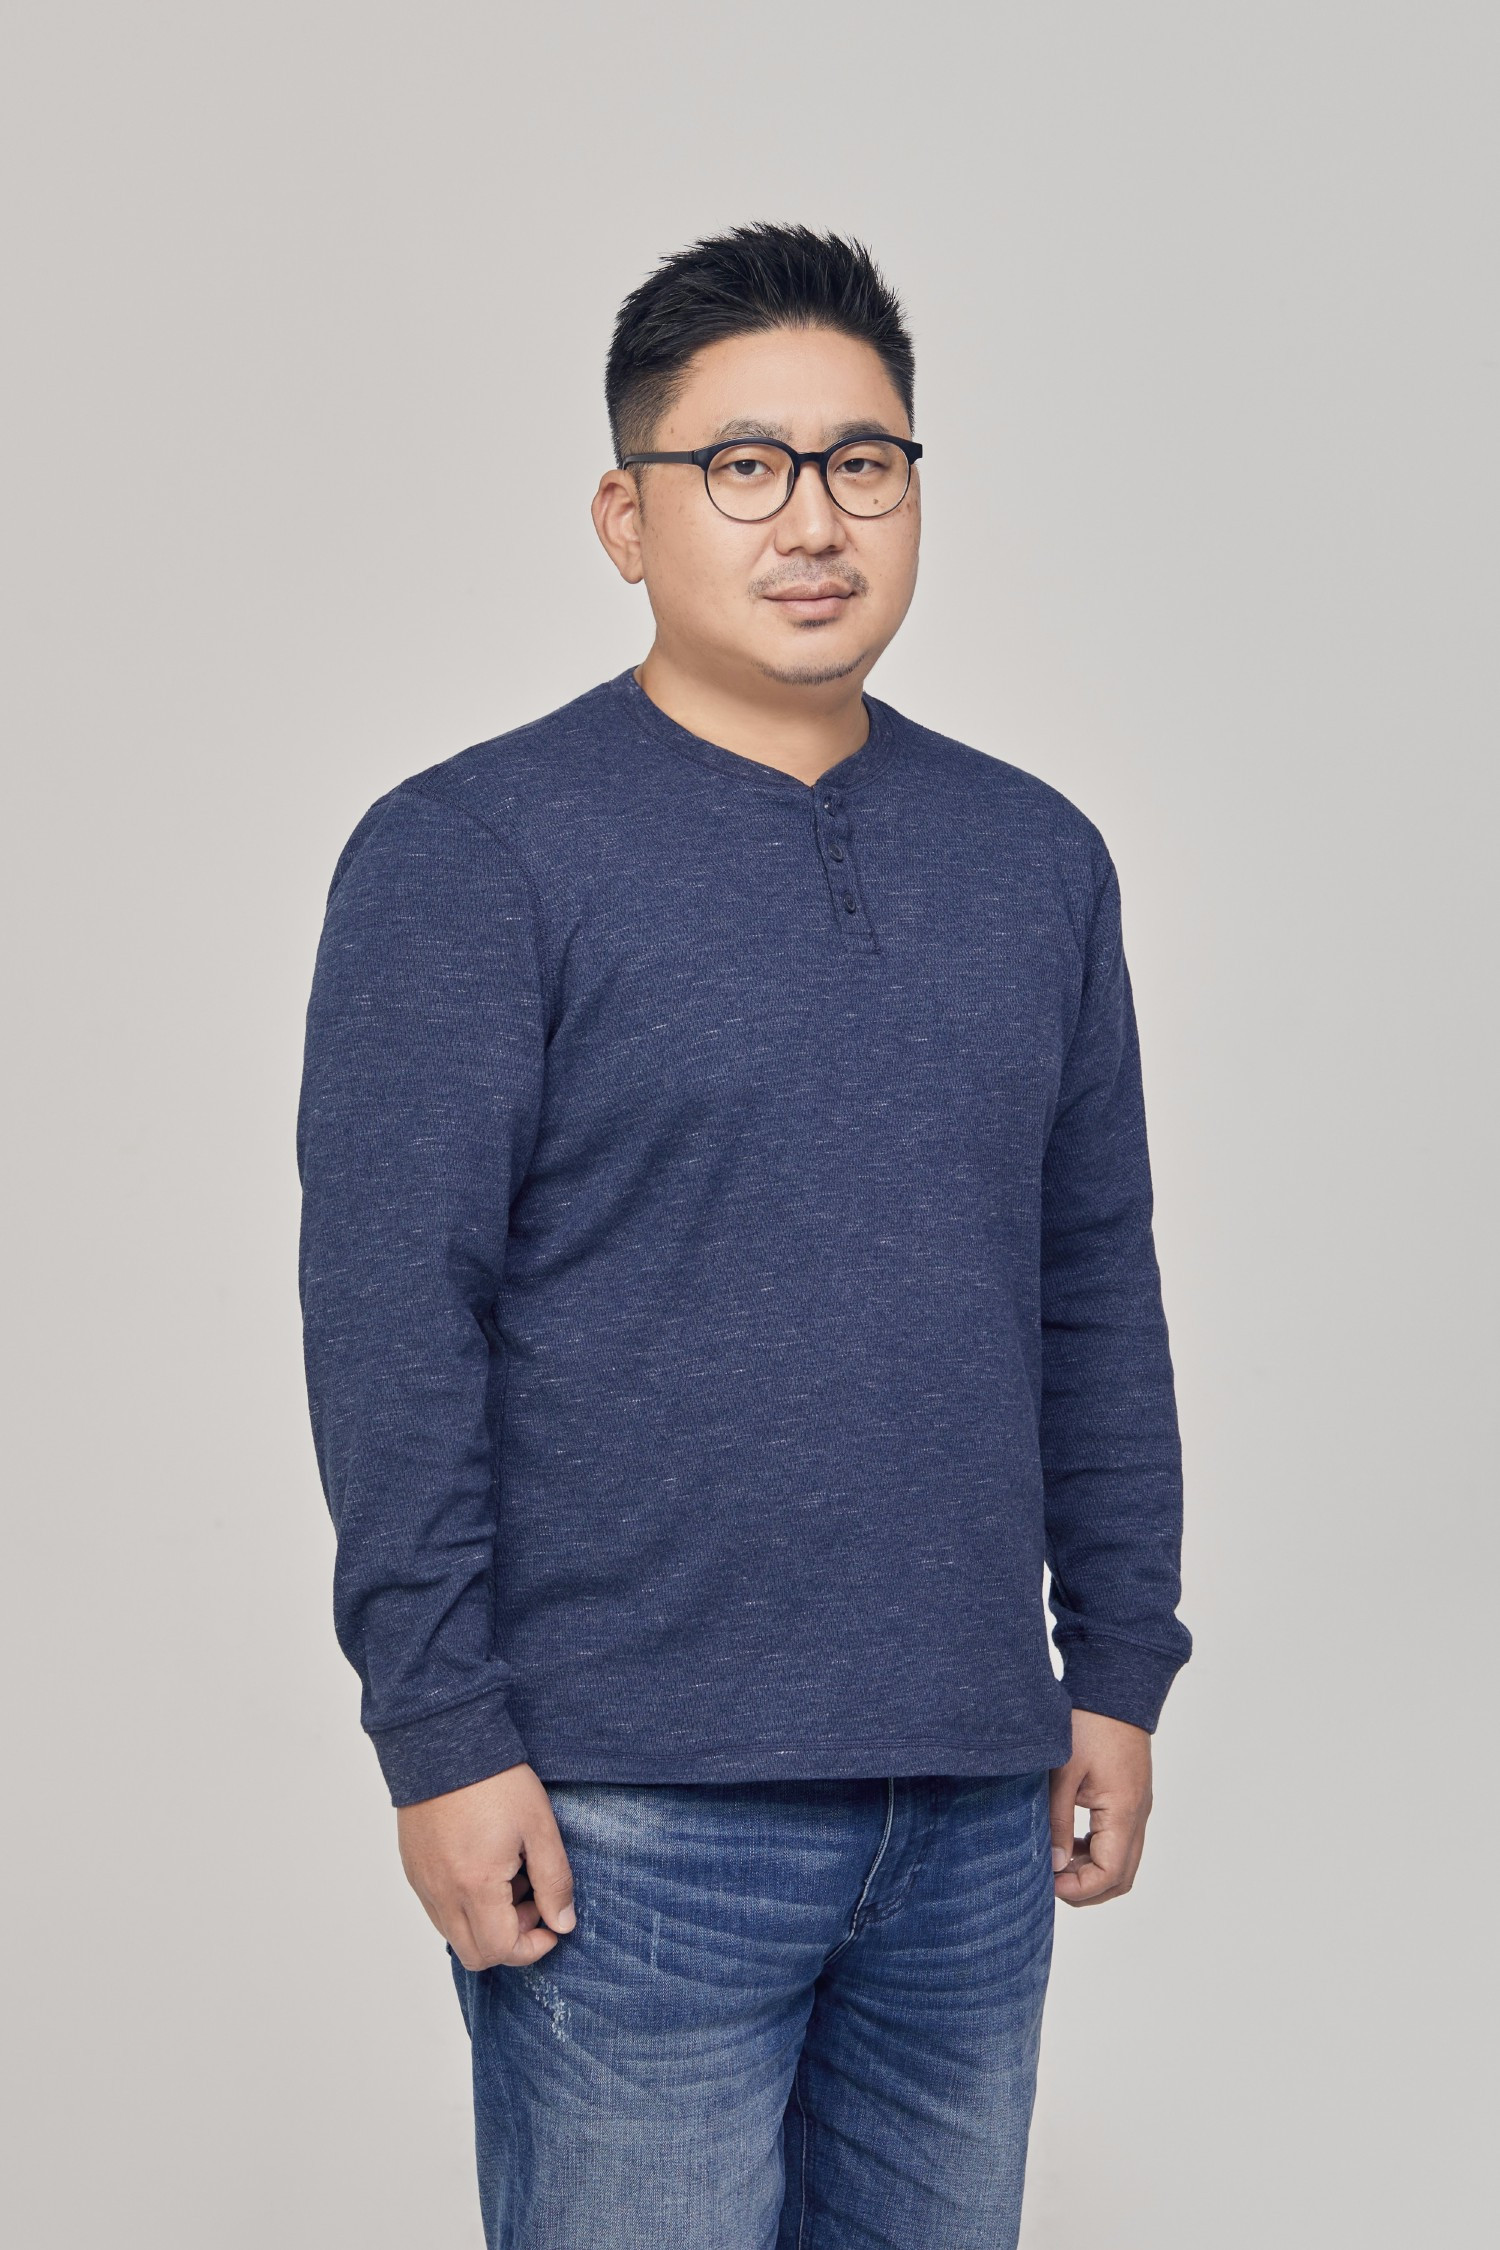 Sunguk Moon is the founder and CEO of Blind. Moon started Blind to bring transparency to the workplace.